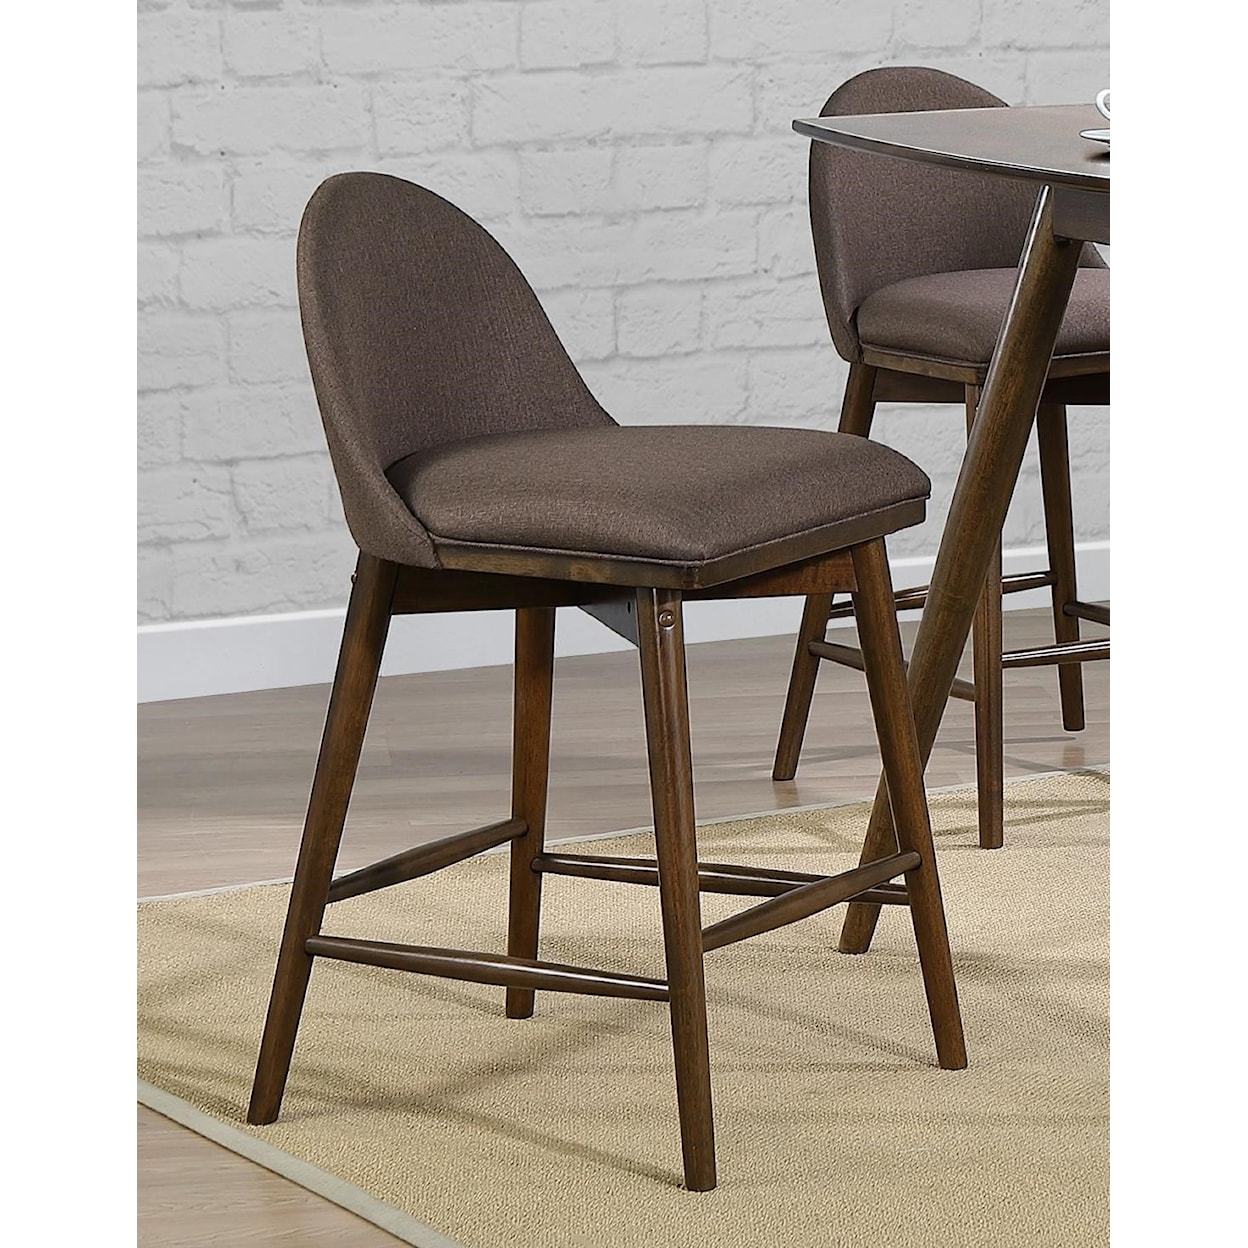 Winners Only Santana Upholstered Counter-Height Chair